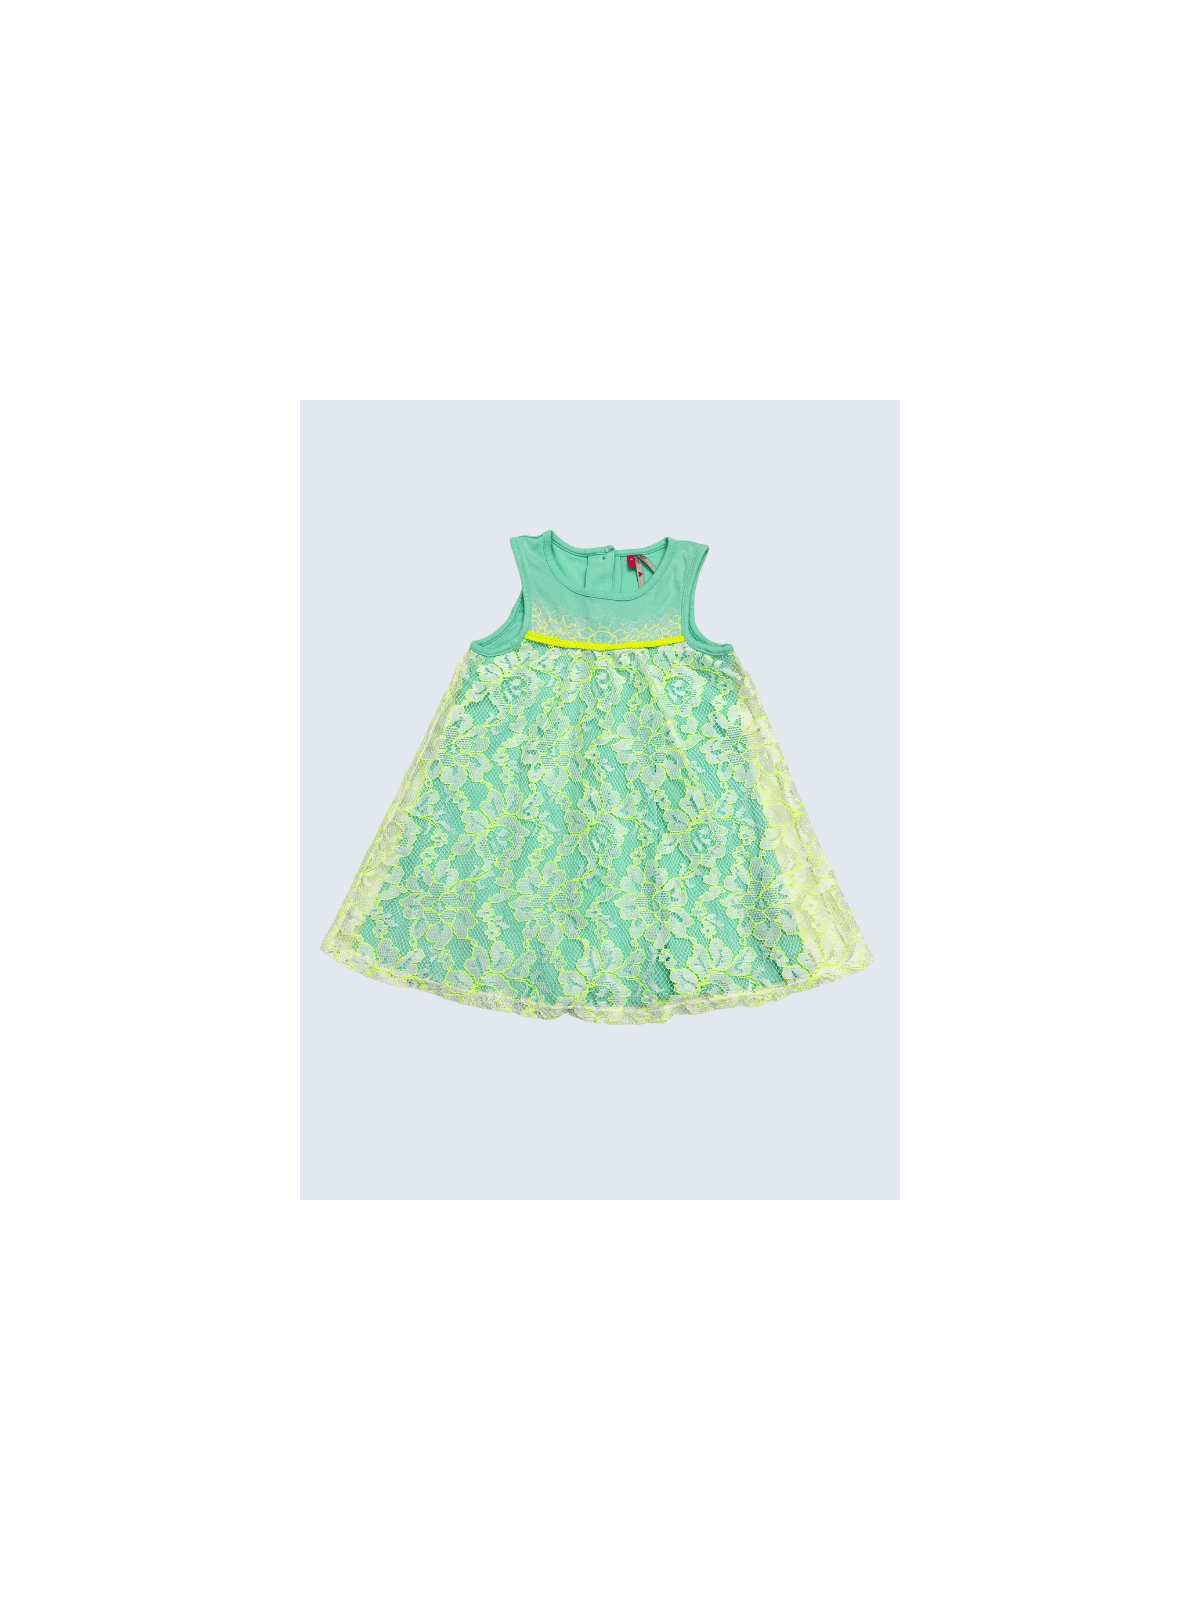 Robe d'occasion Orchestra 18 Mois pour fille.